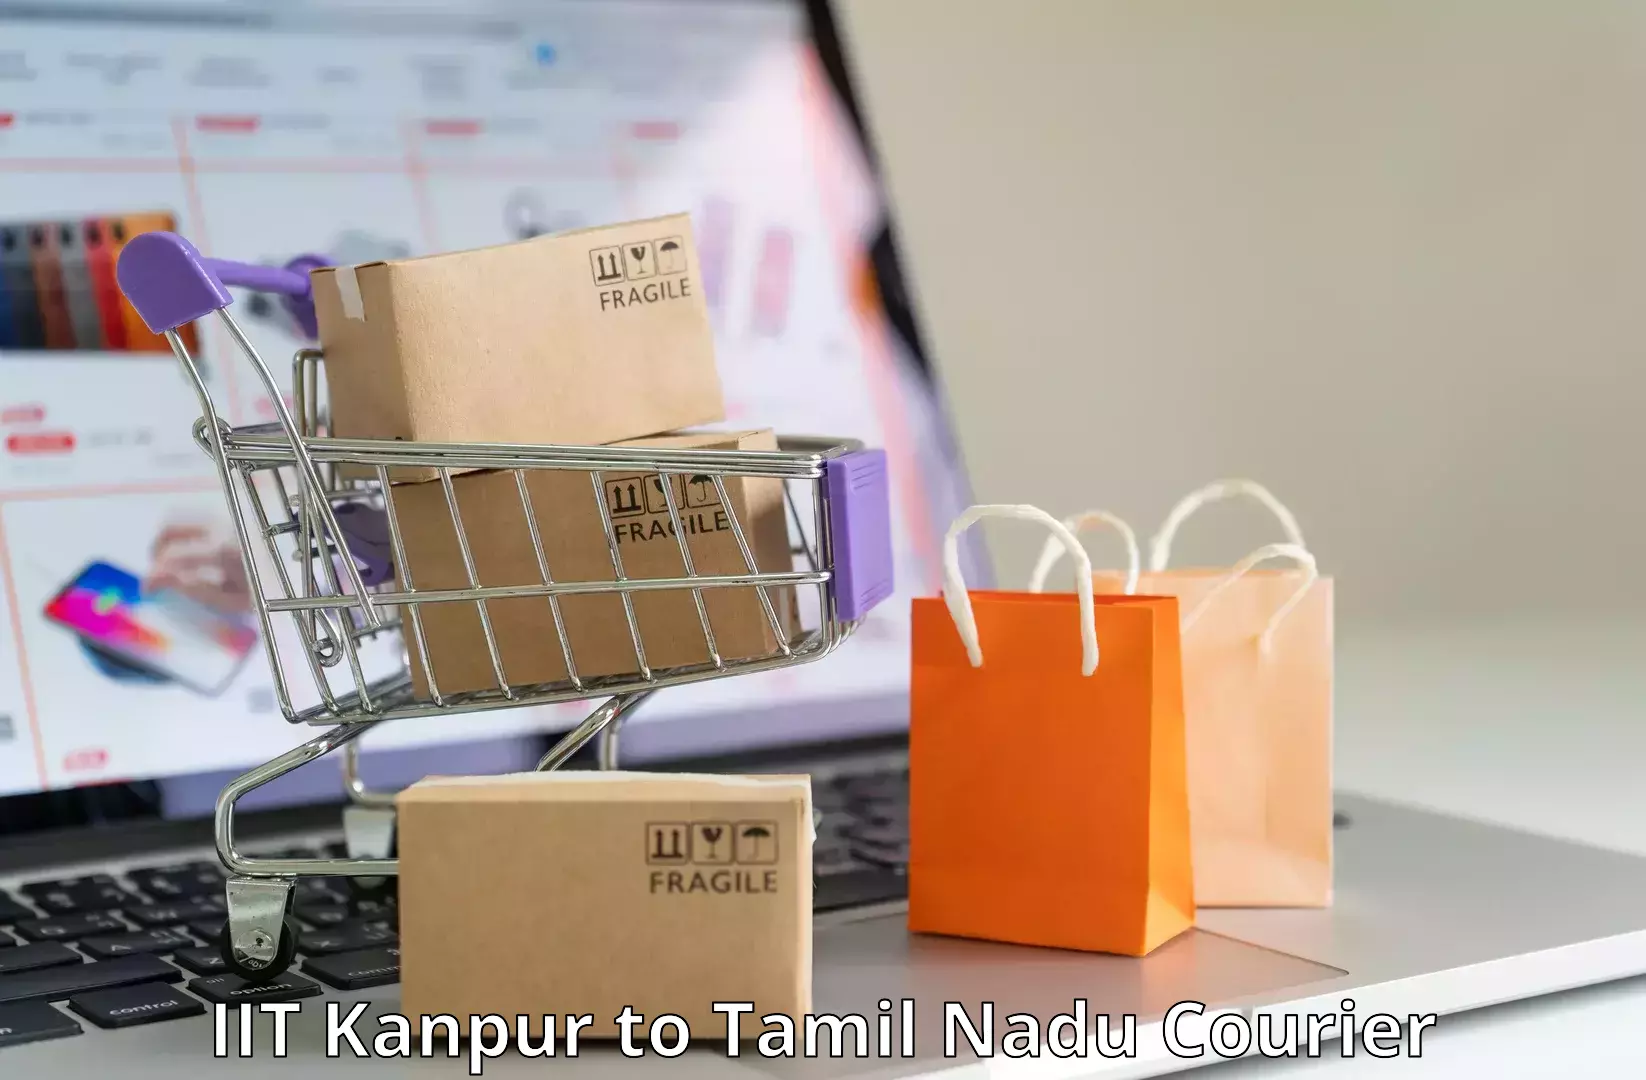 Pharmaceutical courier IIT Kanpur to Tamil Nadu